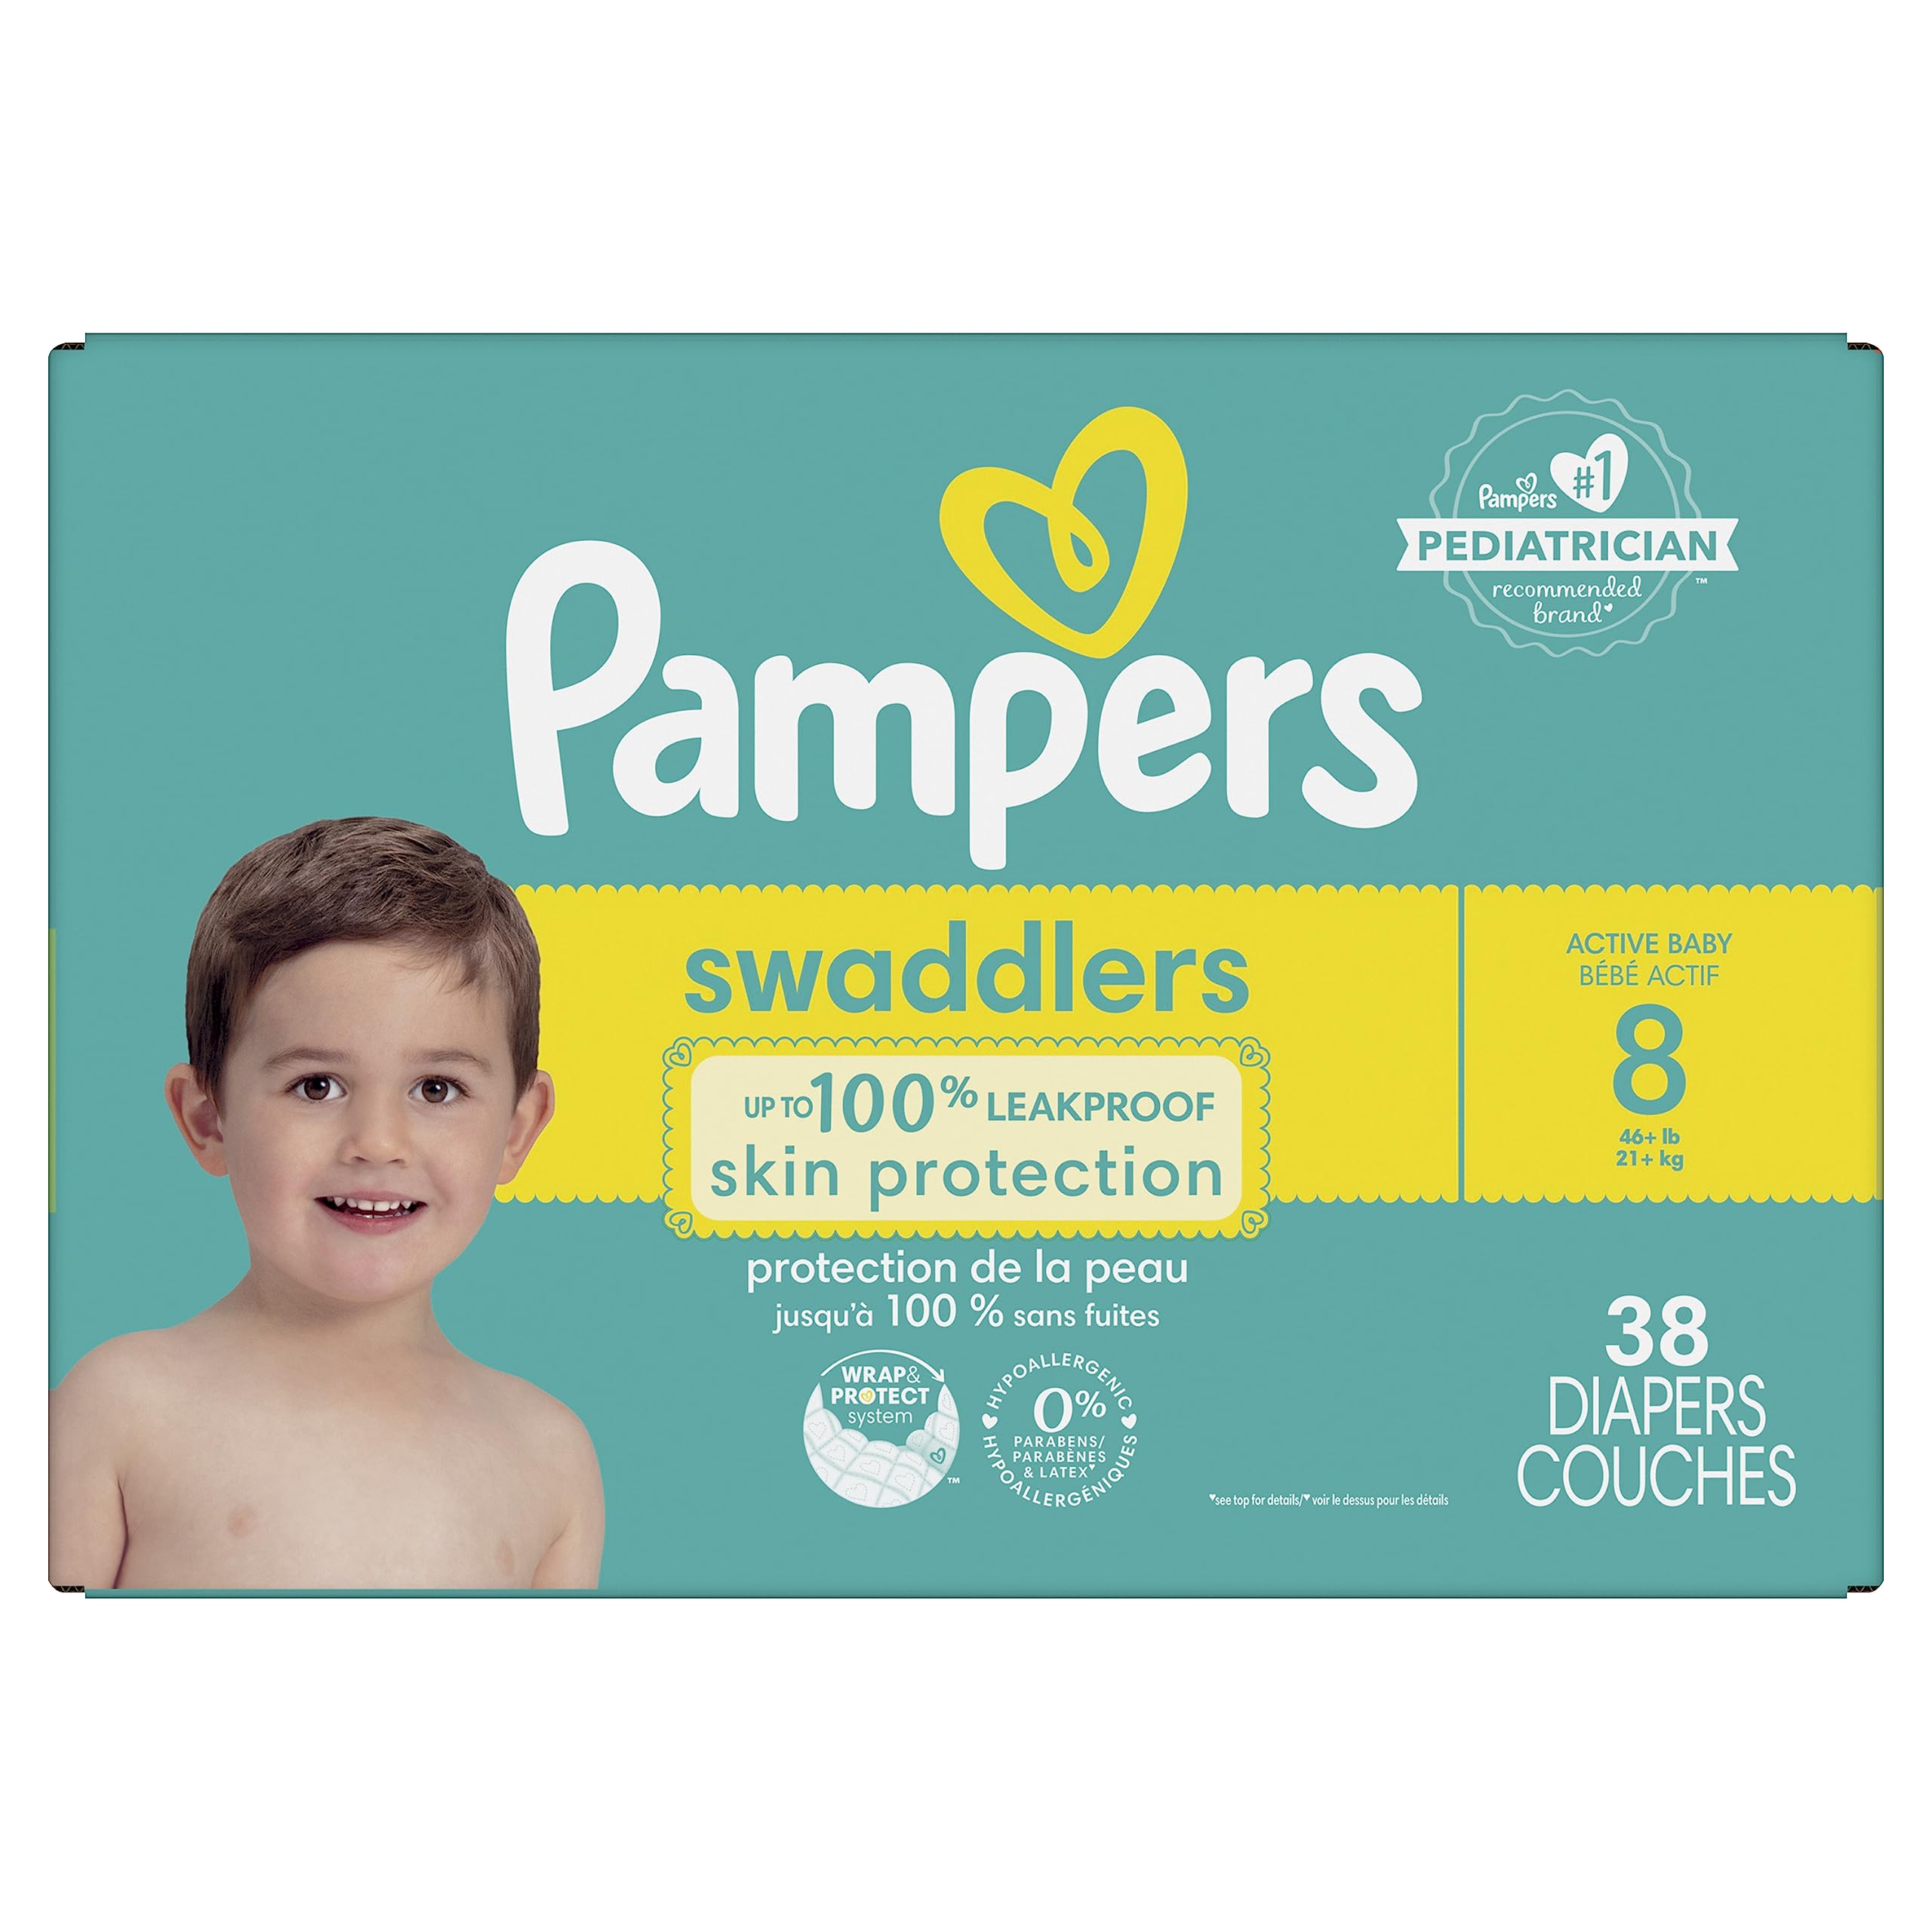 Pampers Swaddlers Diapers Size 8 38 Count